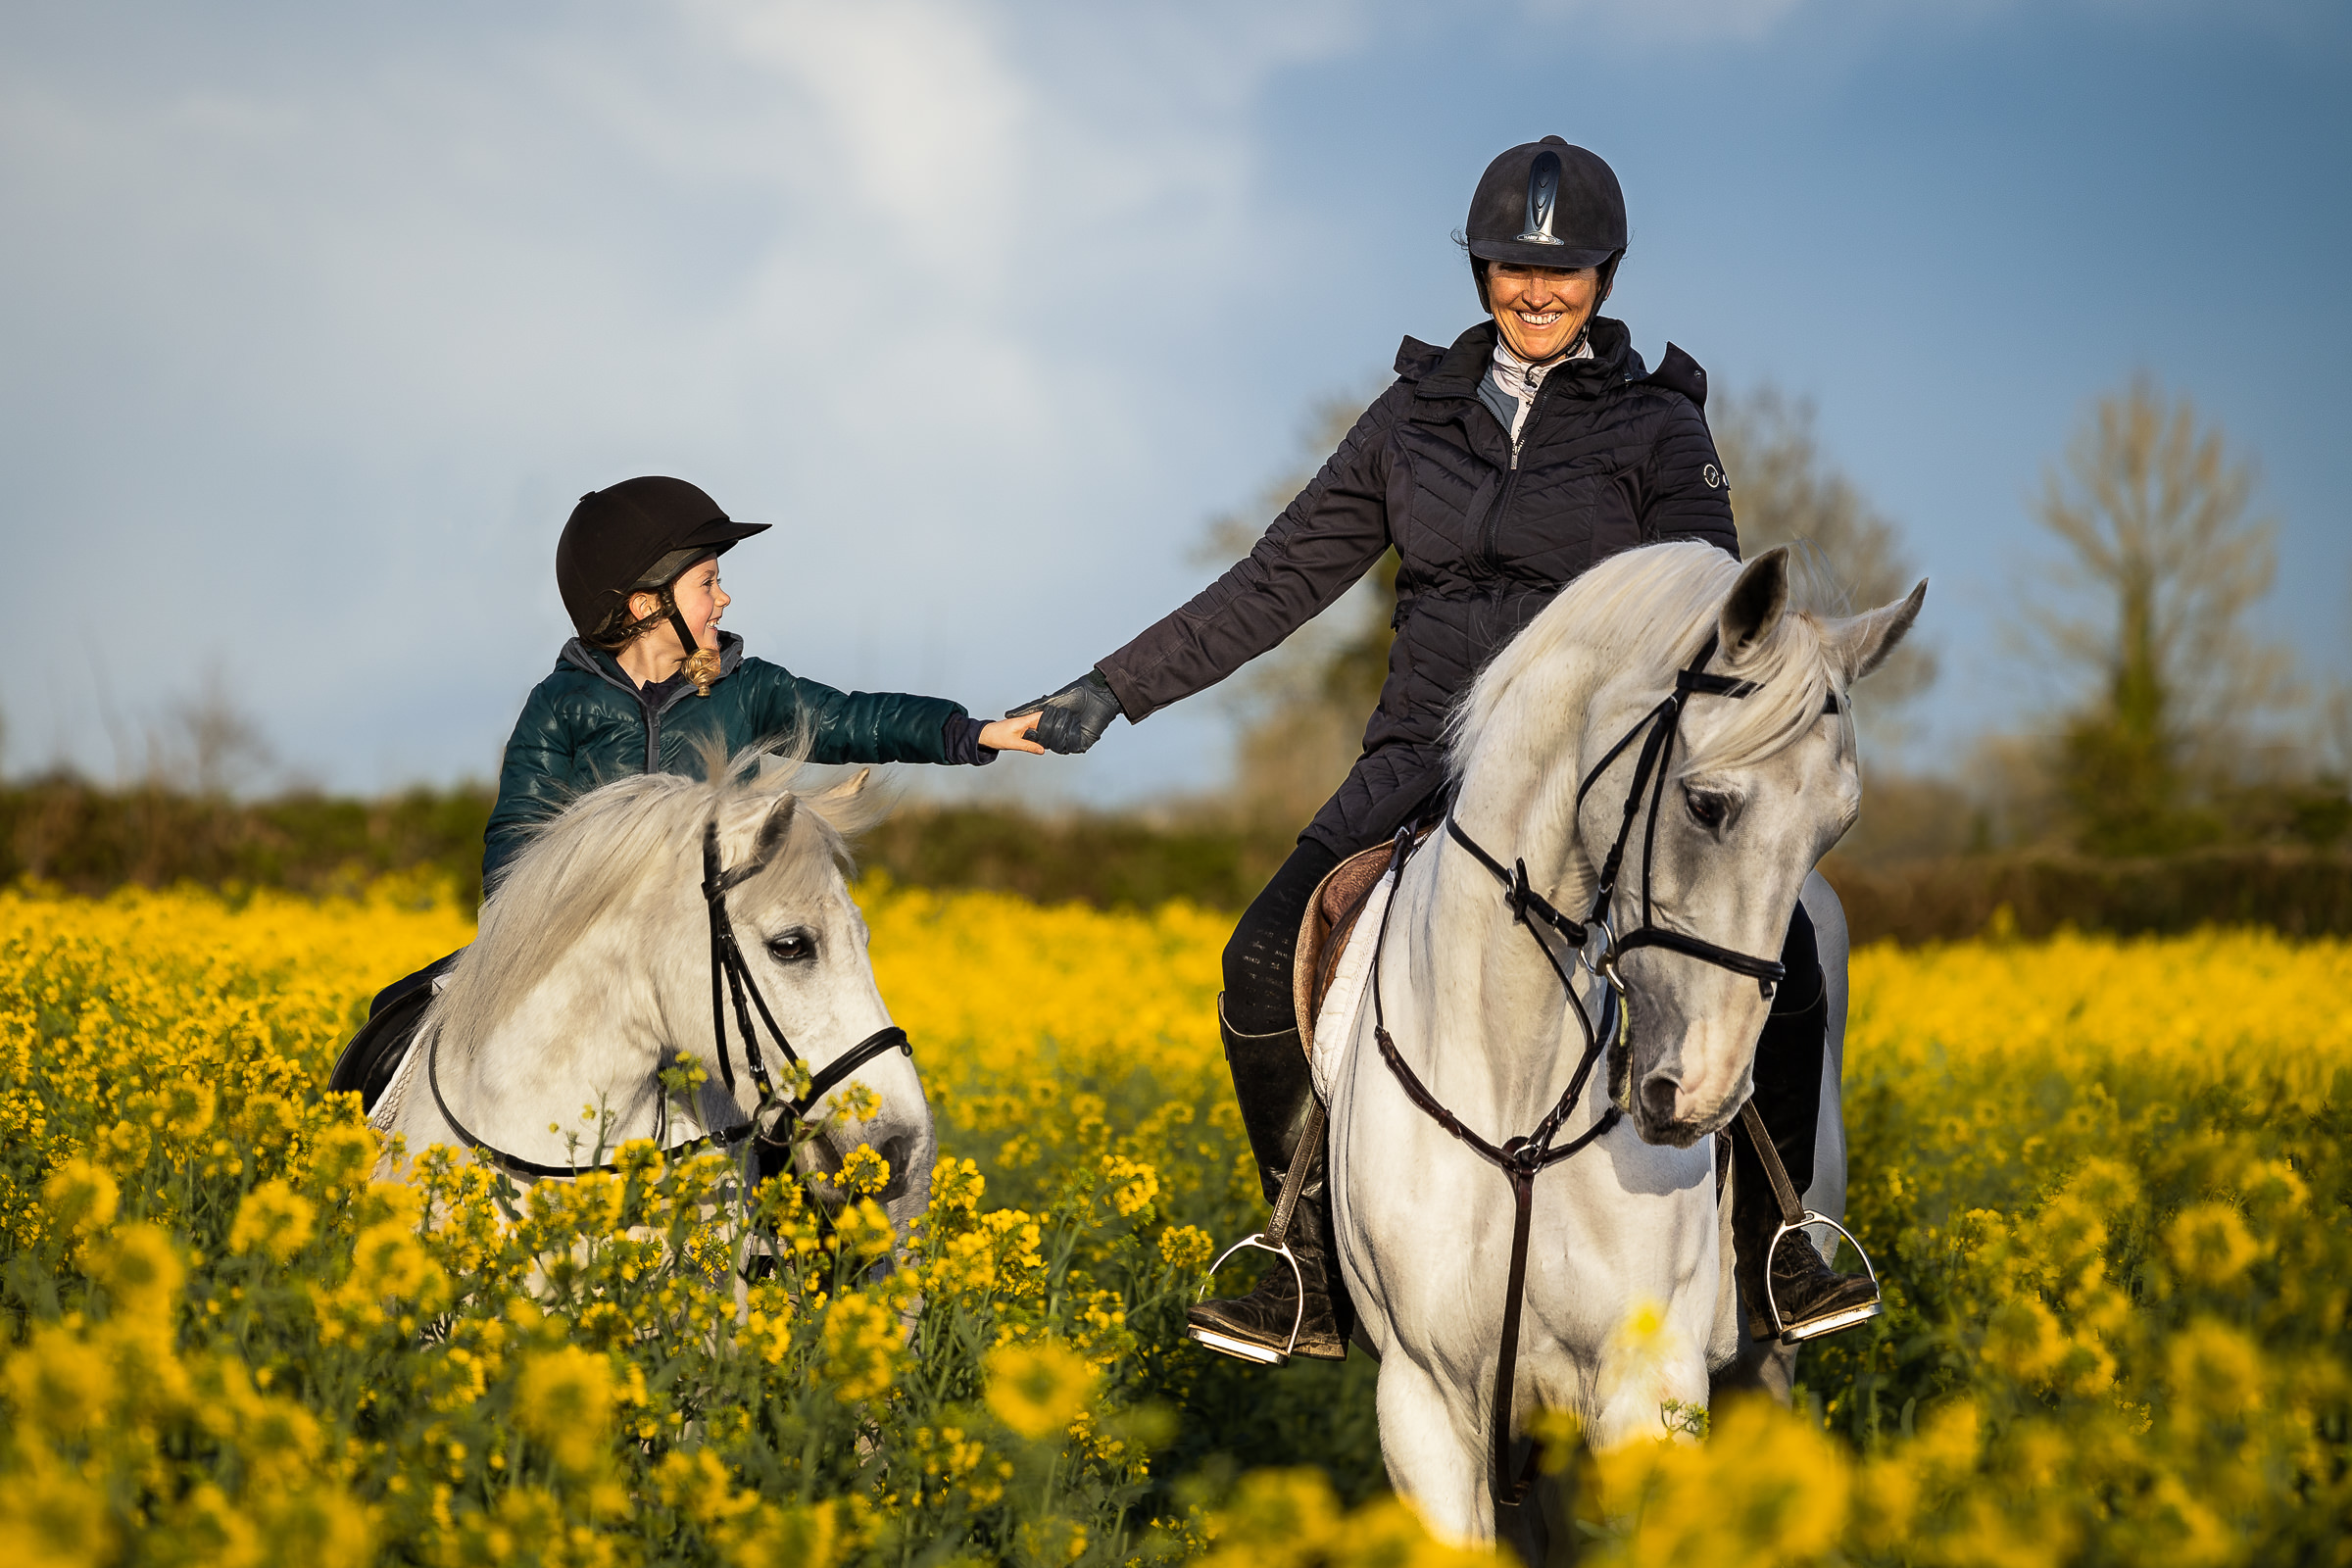 Mother and daughter photo session with a horse and pony in a field of flowers